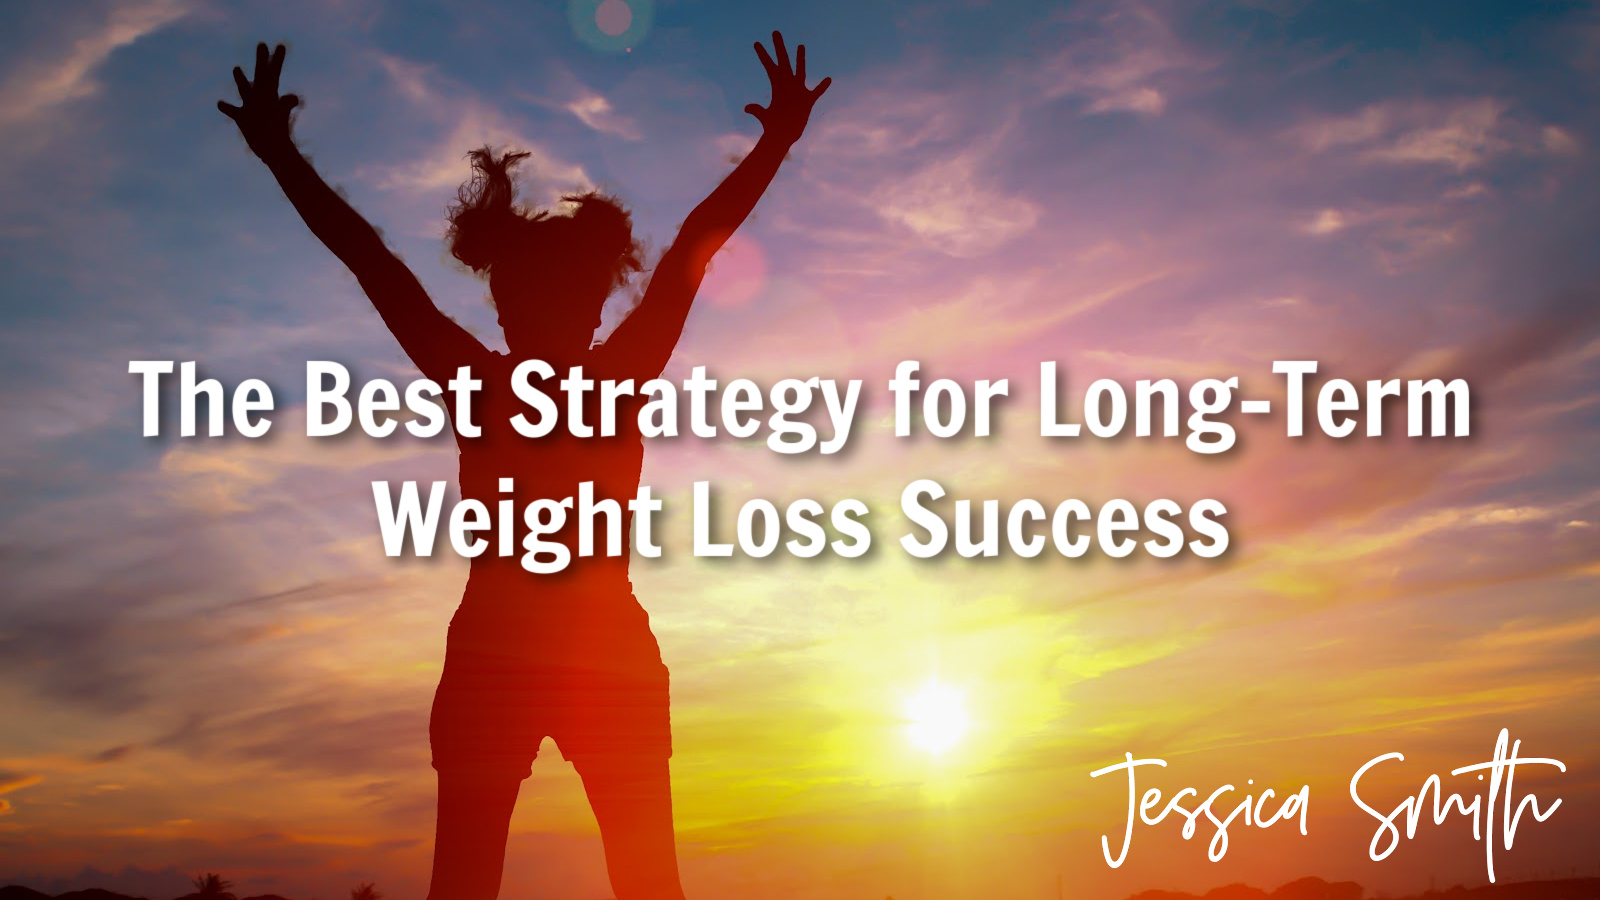 The Best Strategy for Long-Term Weight Loss Success